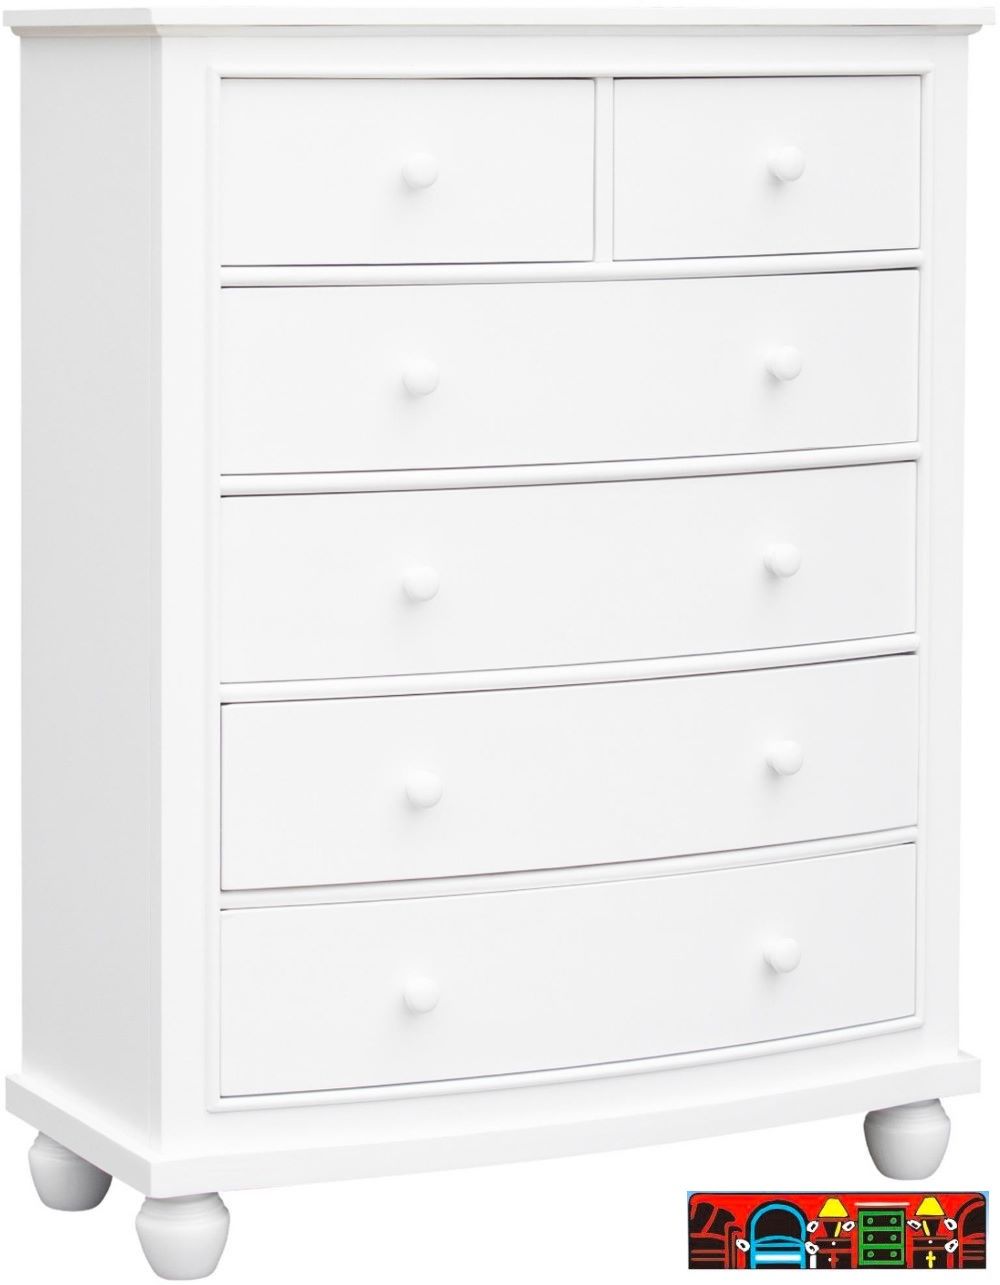 New Nantucket White 6 Drawer Chest in solid wood with dovetailed joints and extended drawers